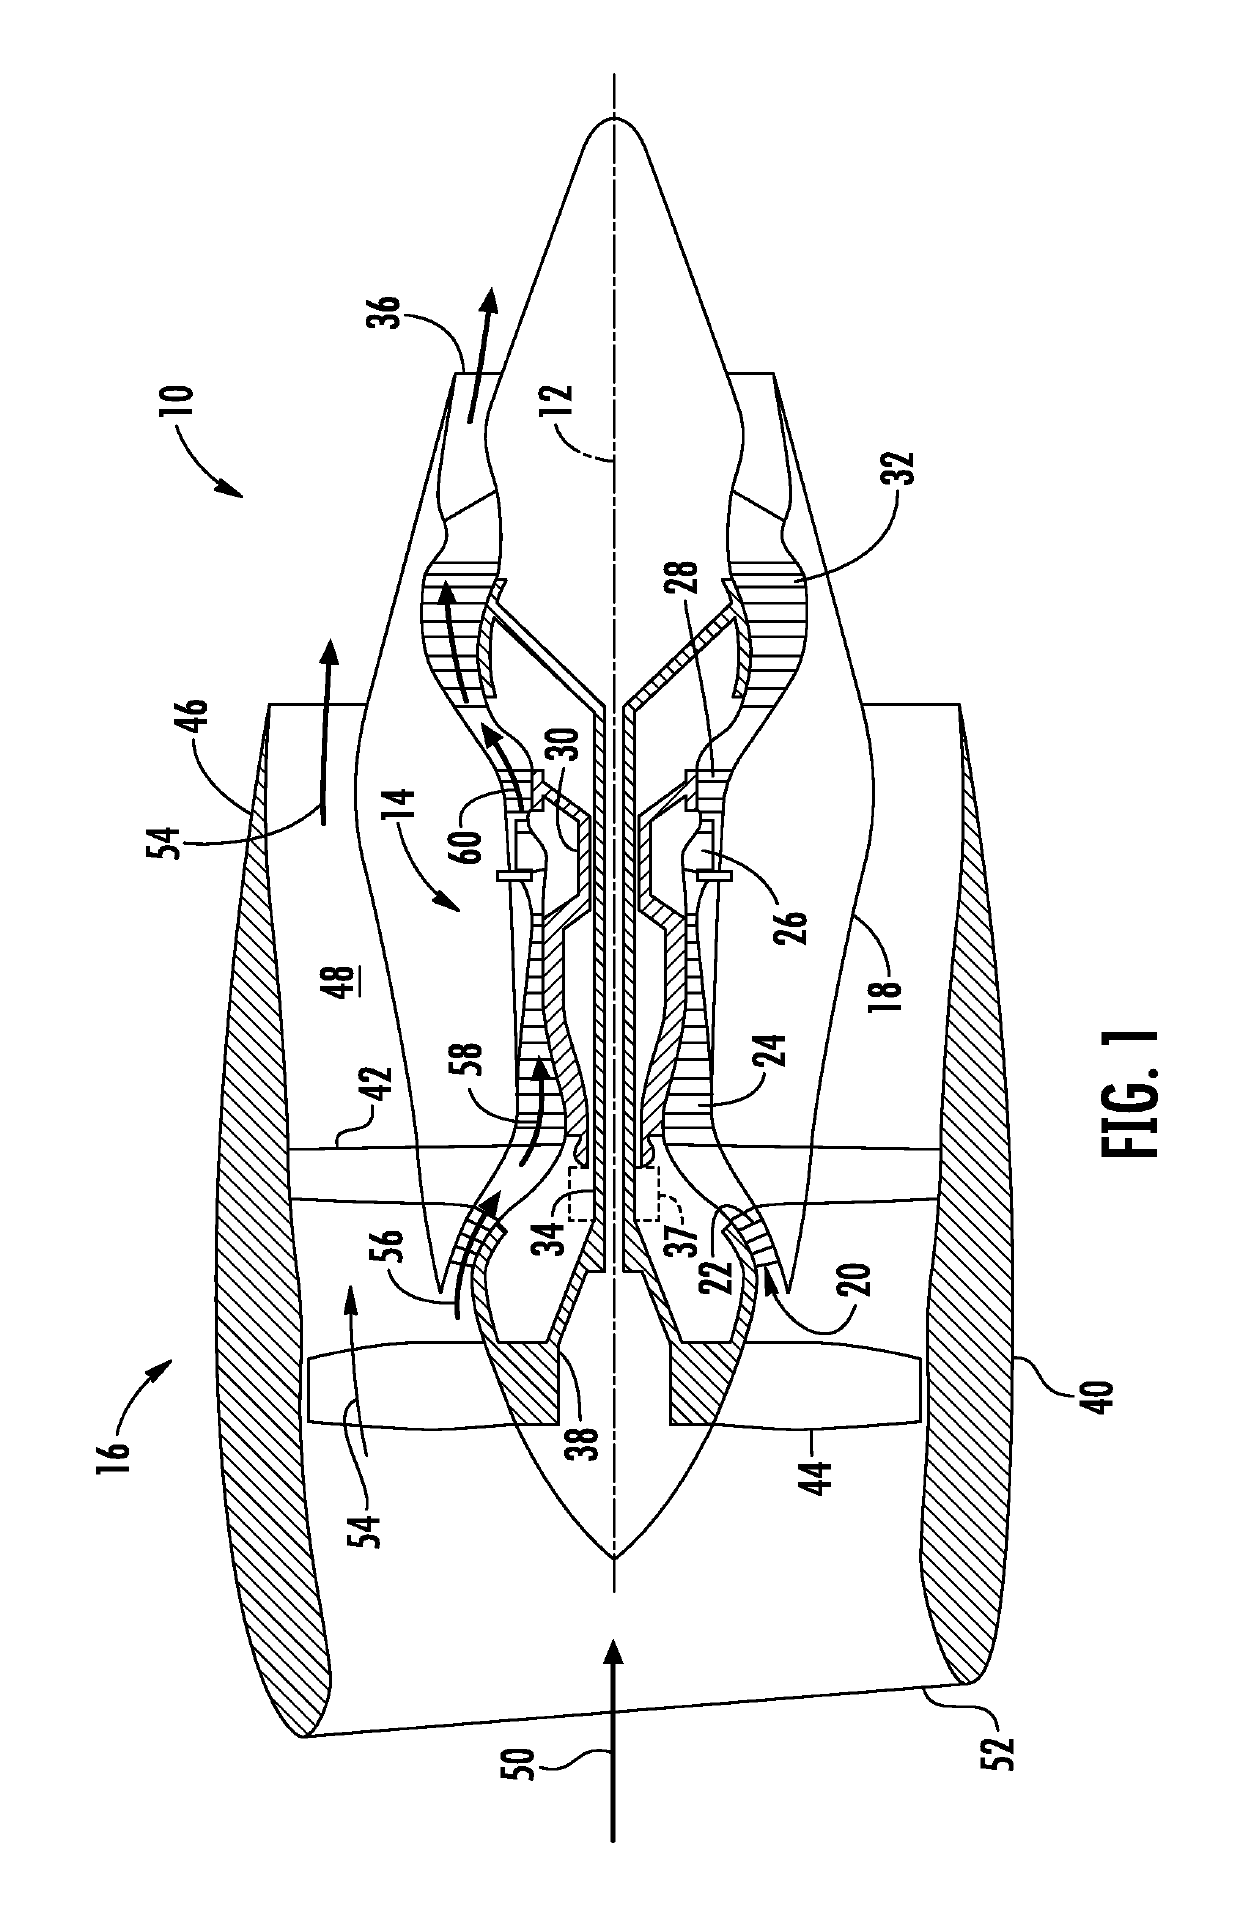 Aeroderivative jet engine accessory starter relocation to main shaft—directly connected to HPC shaft